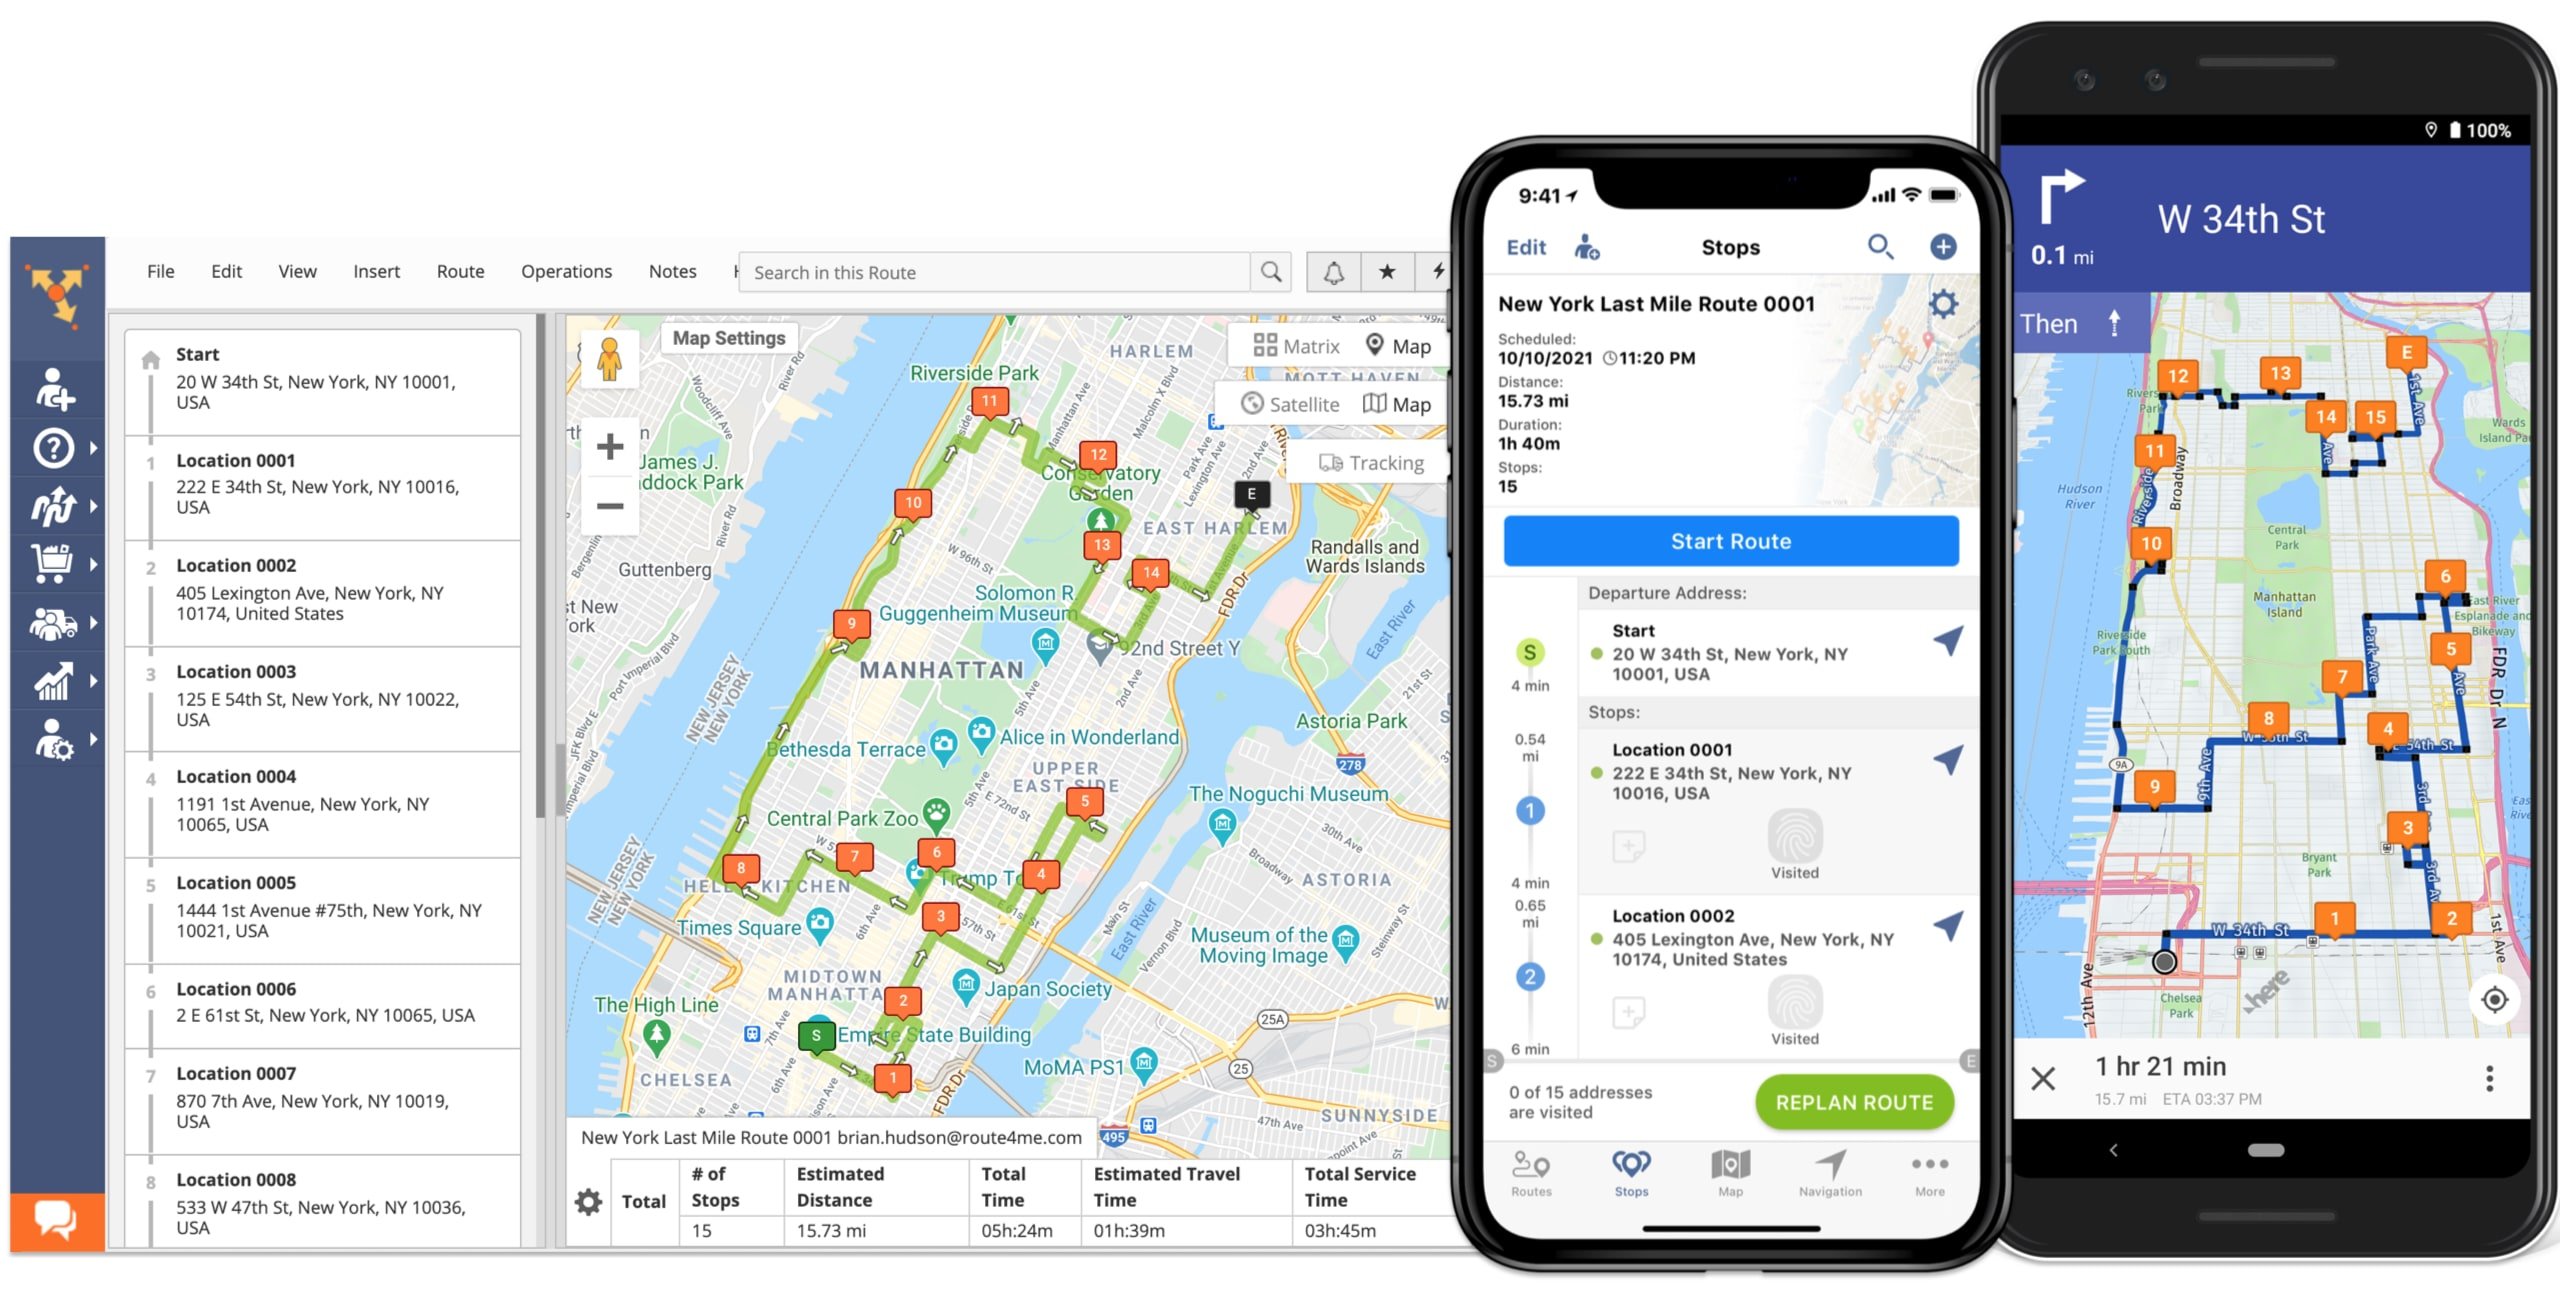 Route dispatch on courier app - assigning delivery drivers to planned routes and sending the routes to drivers' route planner apps